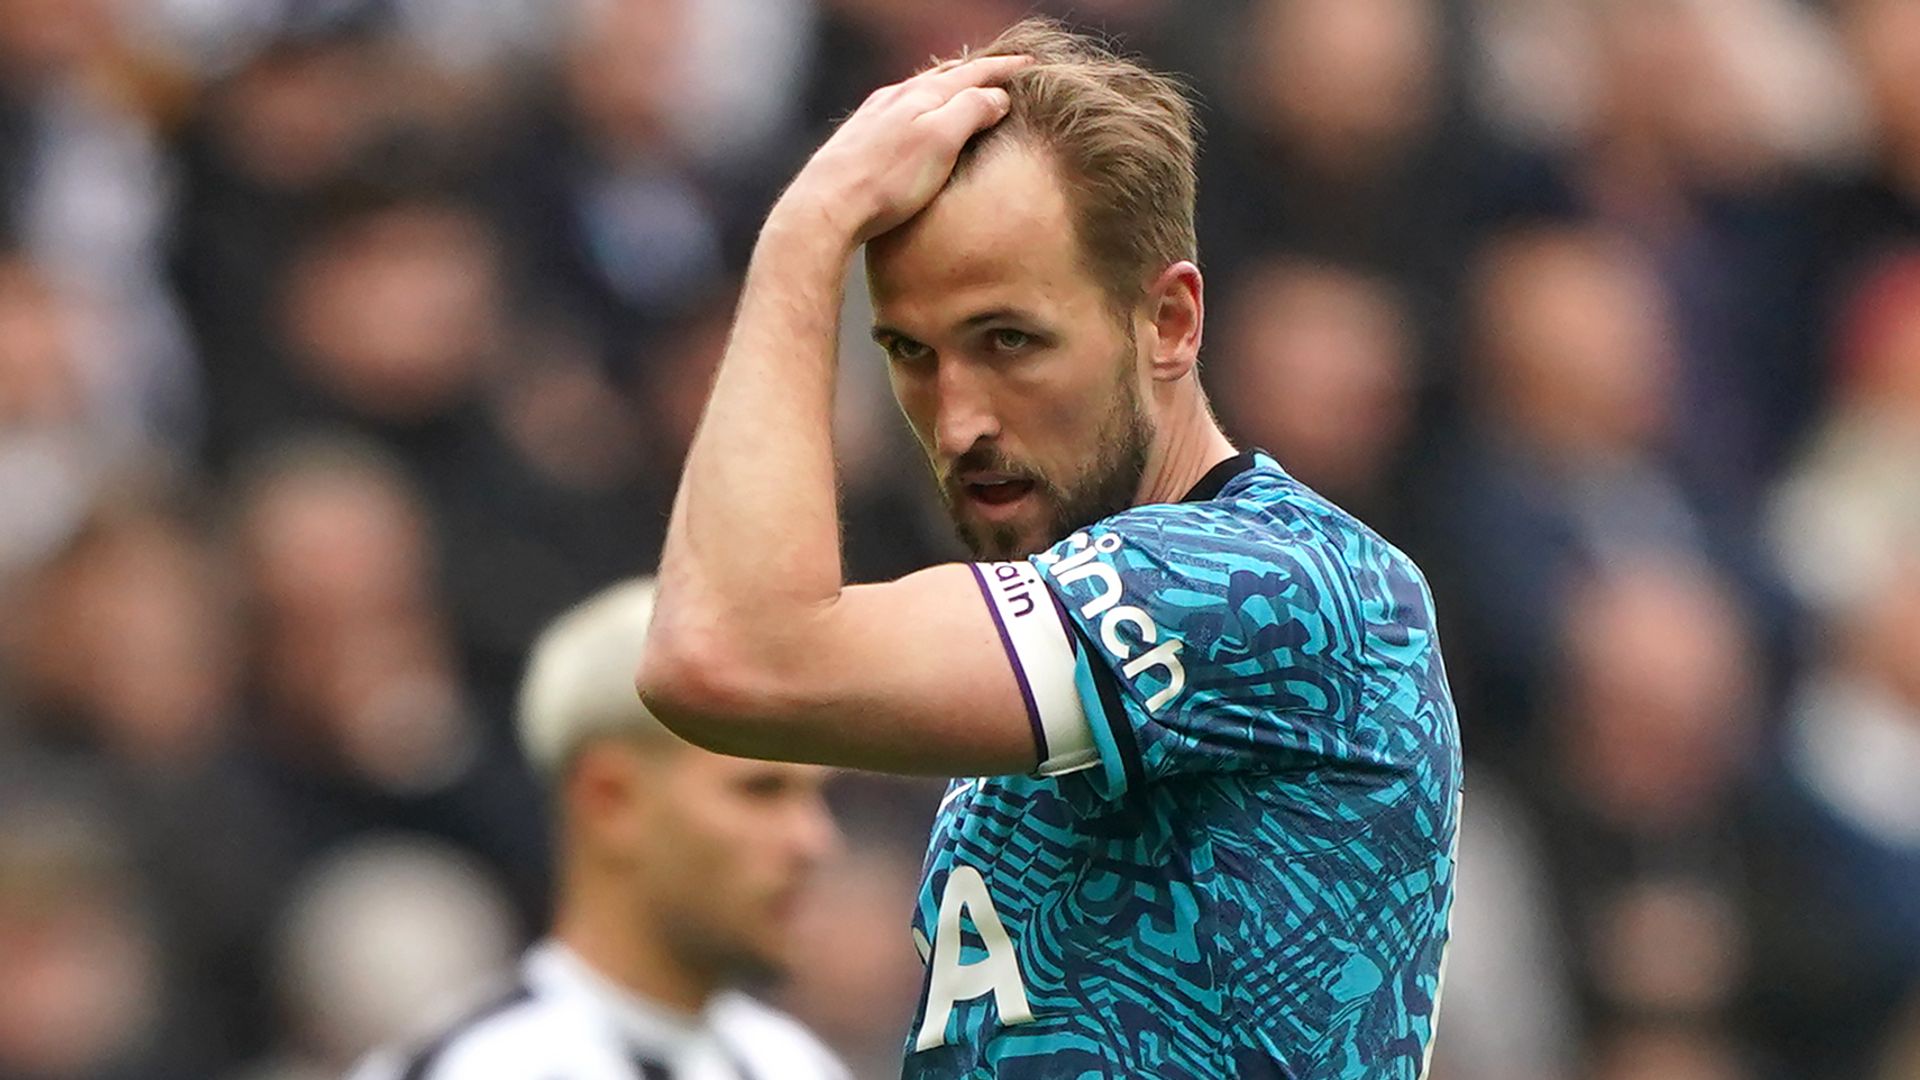 Hits and misses: How low could Spurs go? West Ham revived